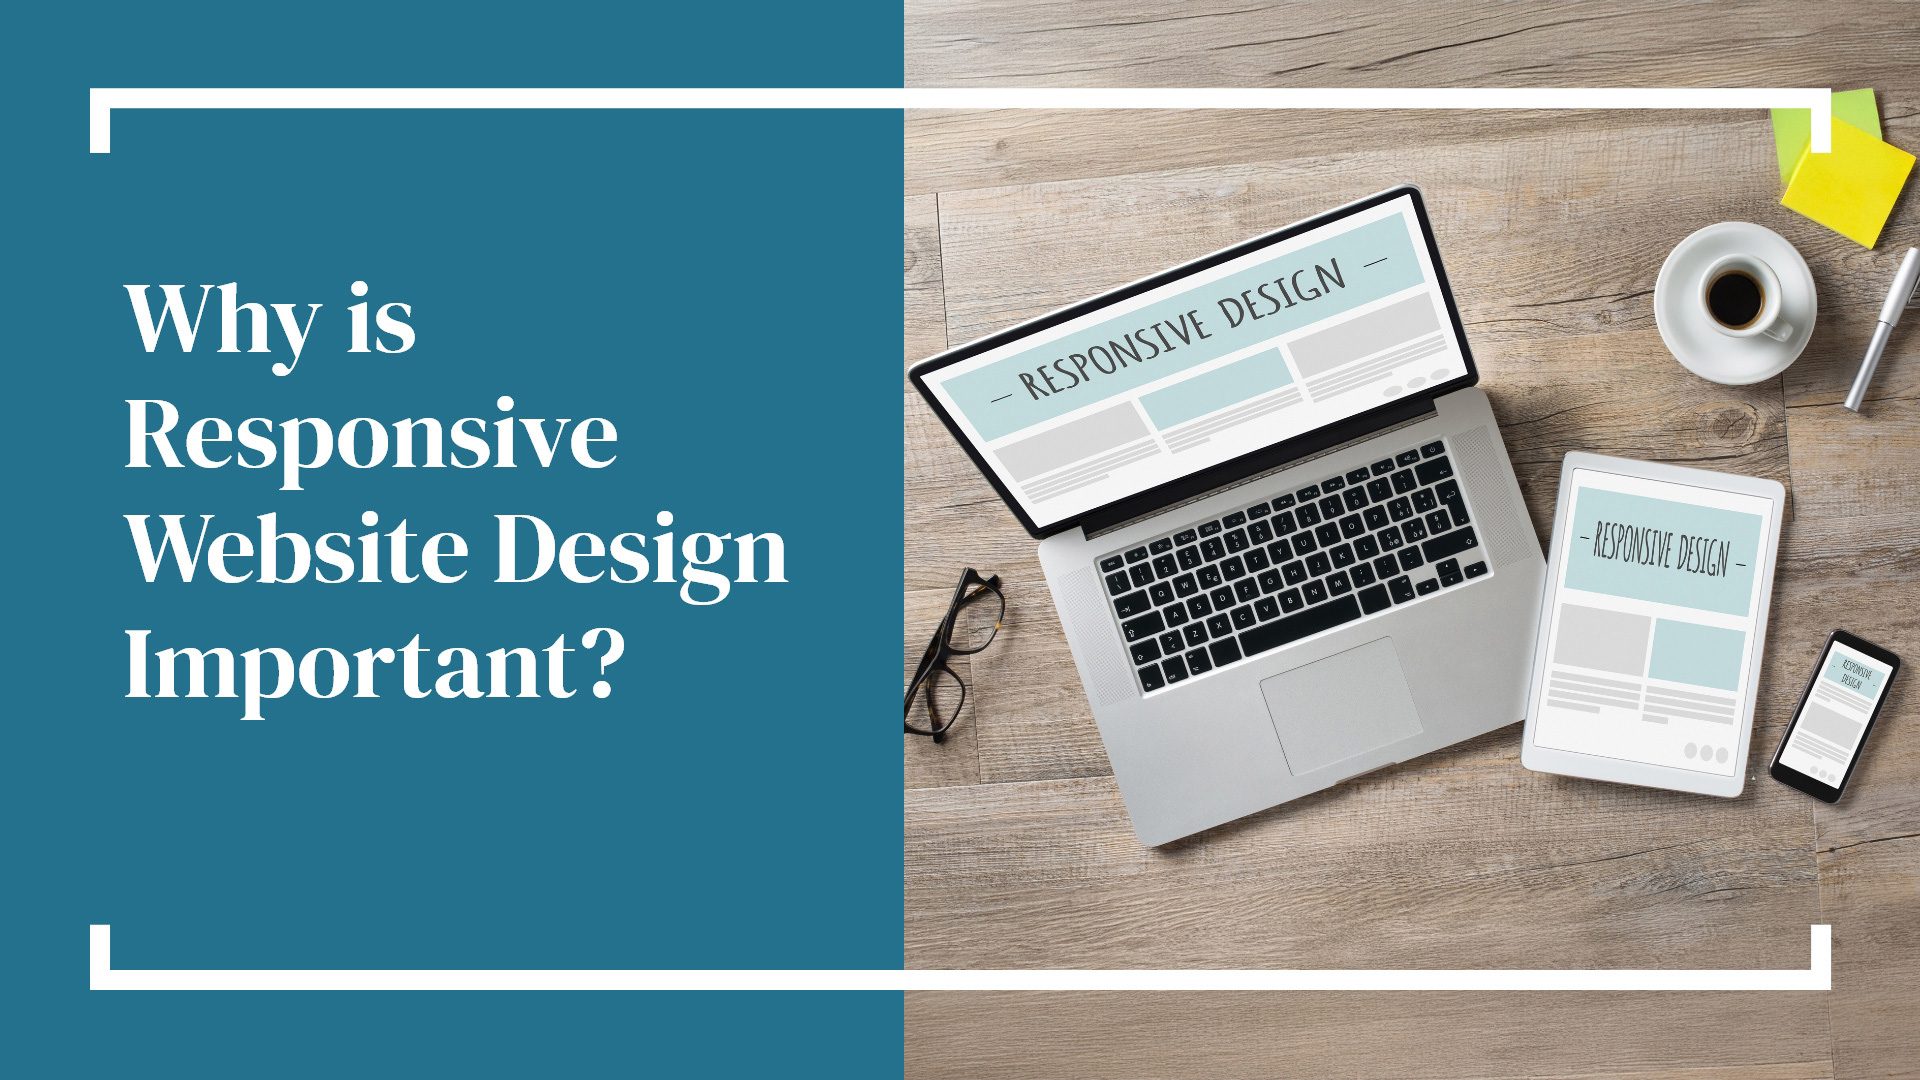 What is Responsive Website Design and Why is it Important?